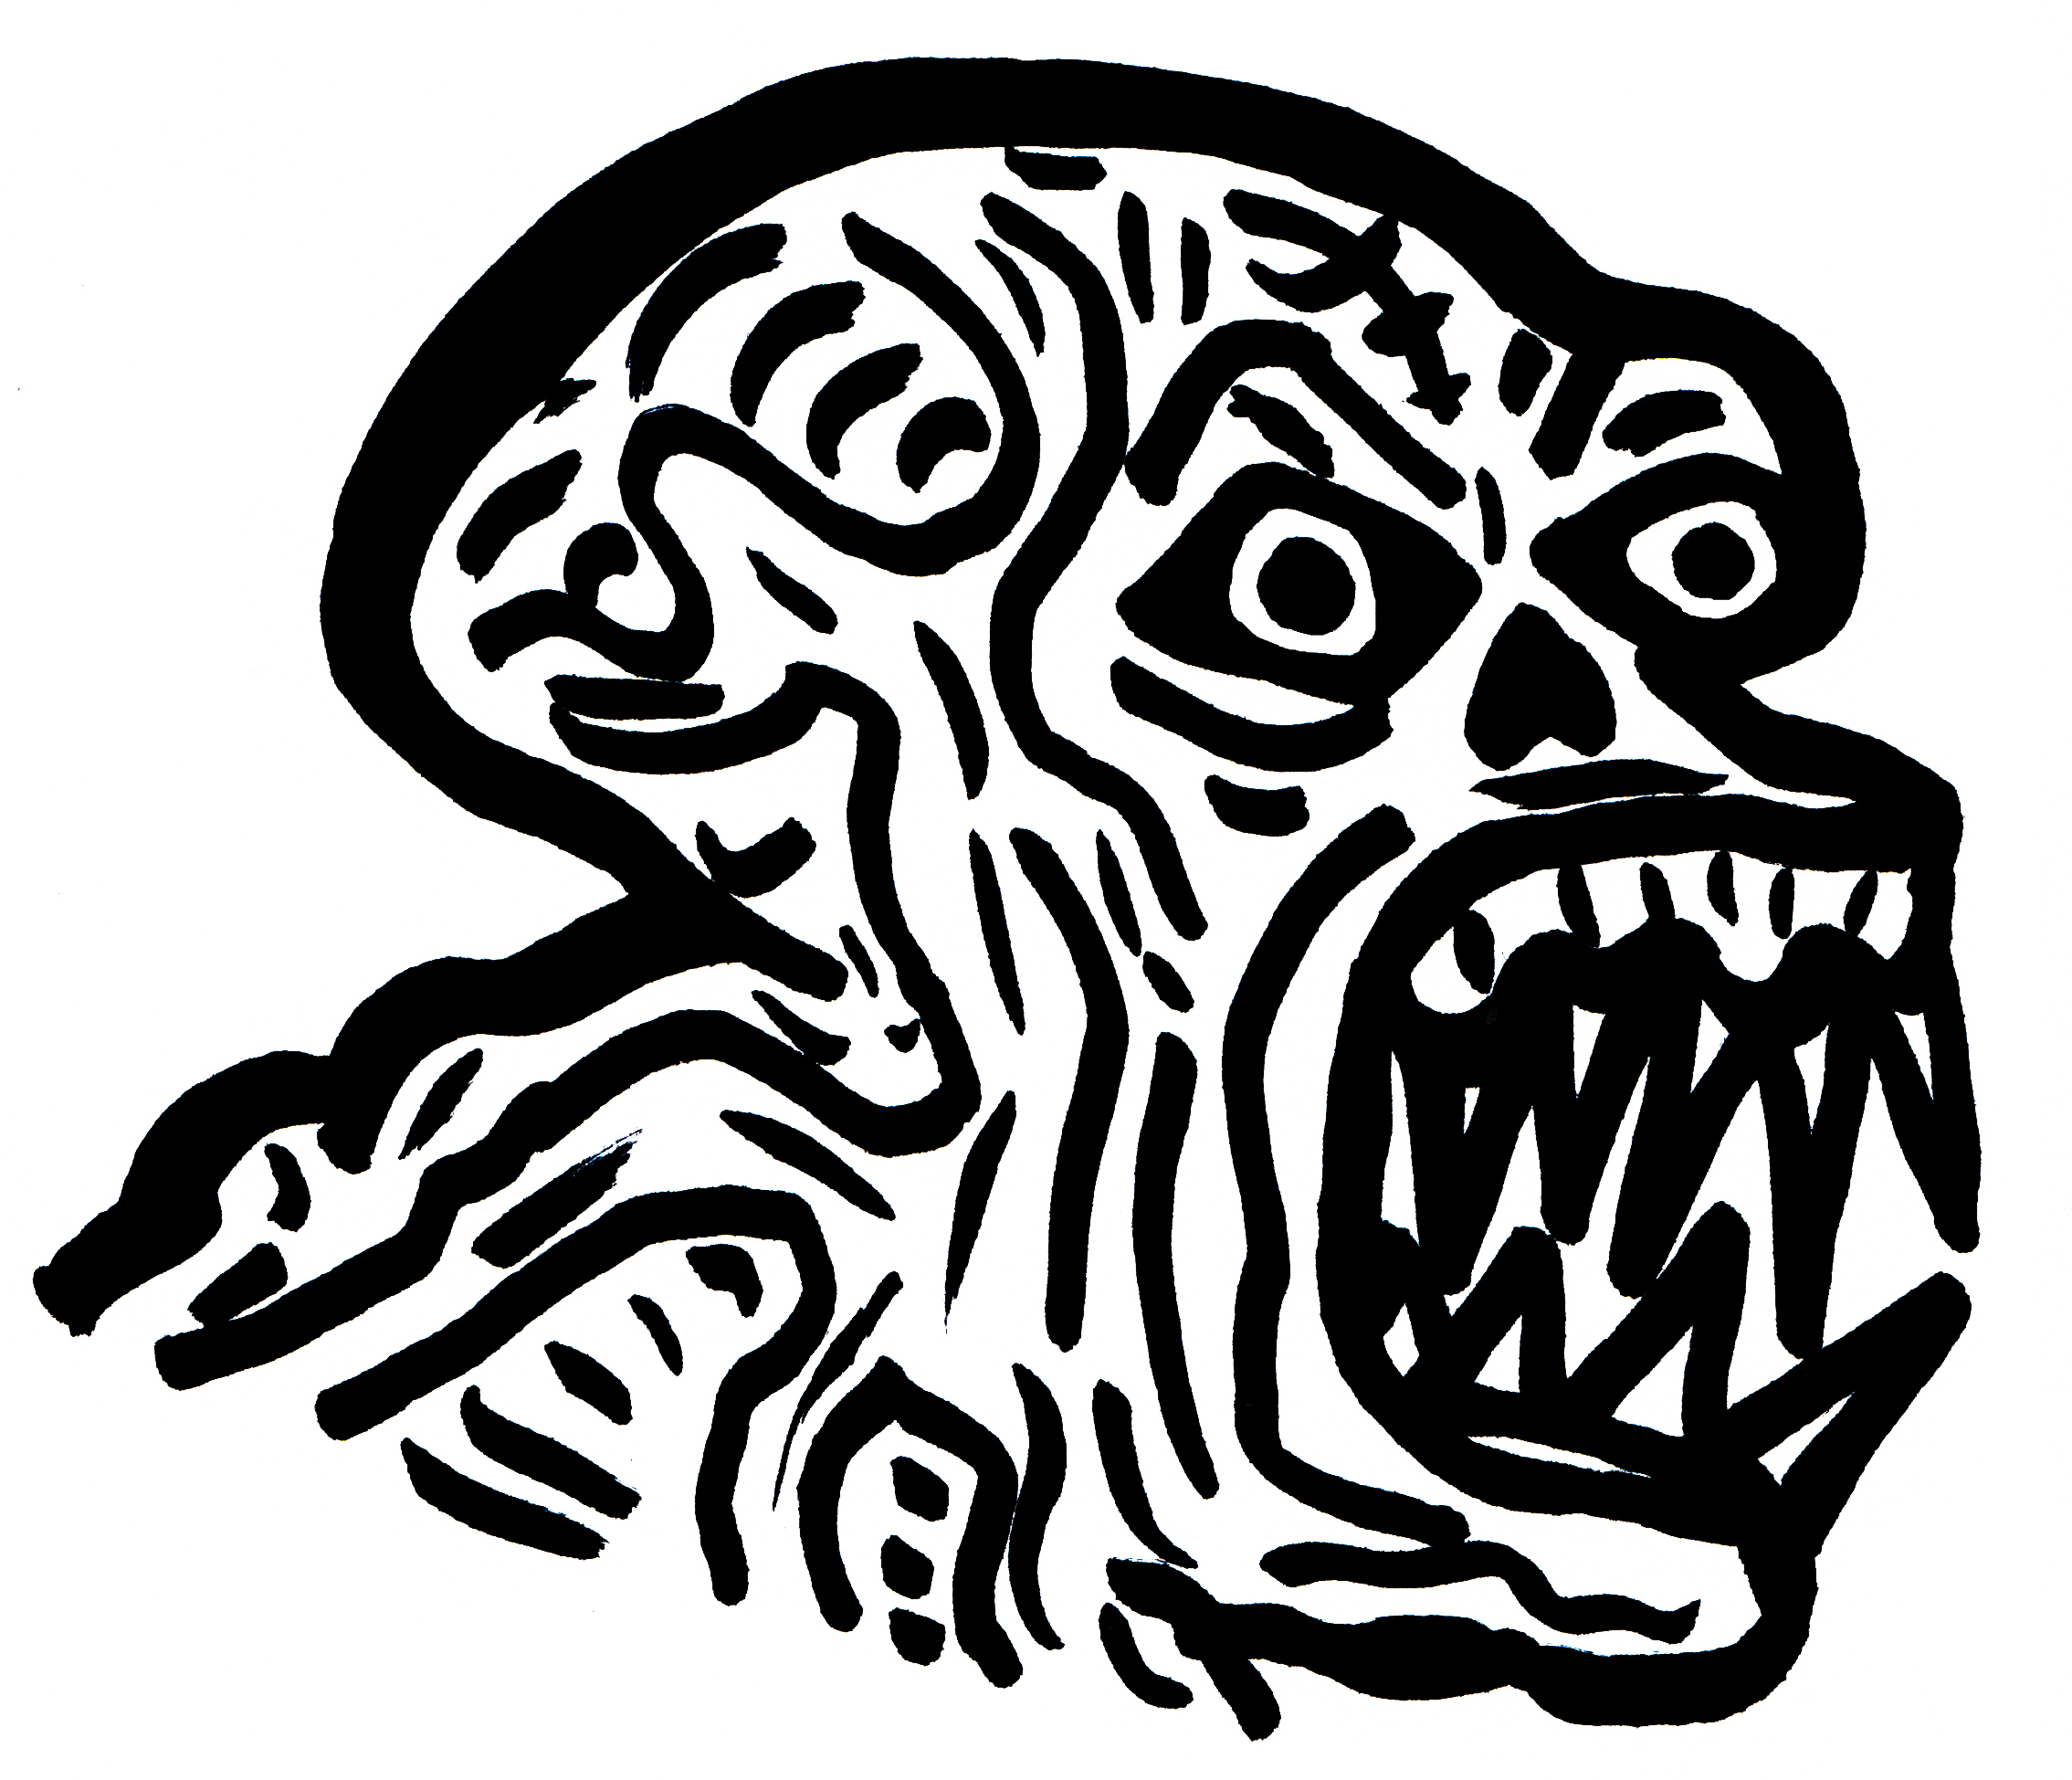 If You See TROLLGE Outside Your House, RUN AWAY FAST!! (Scary